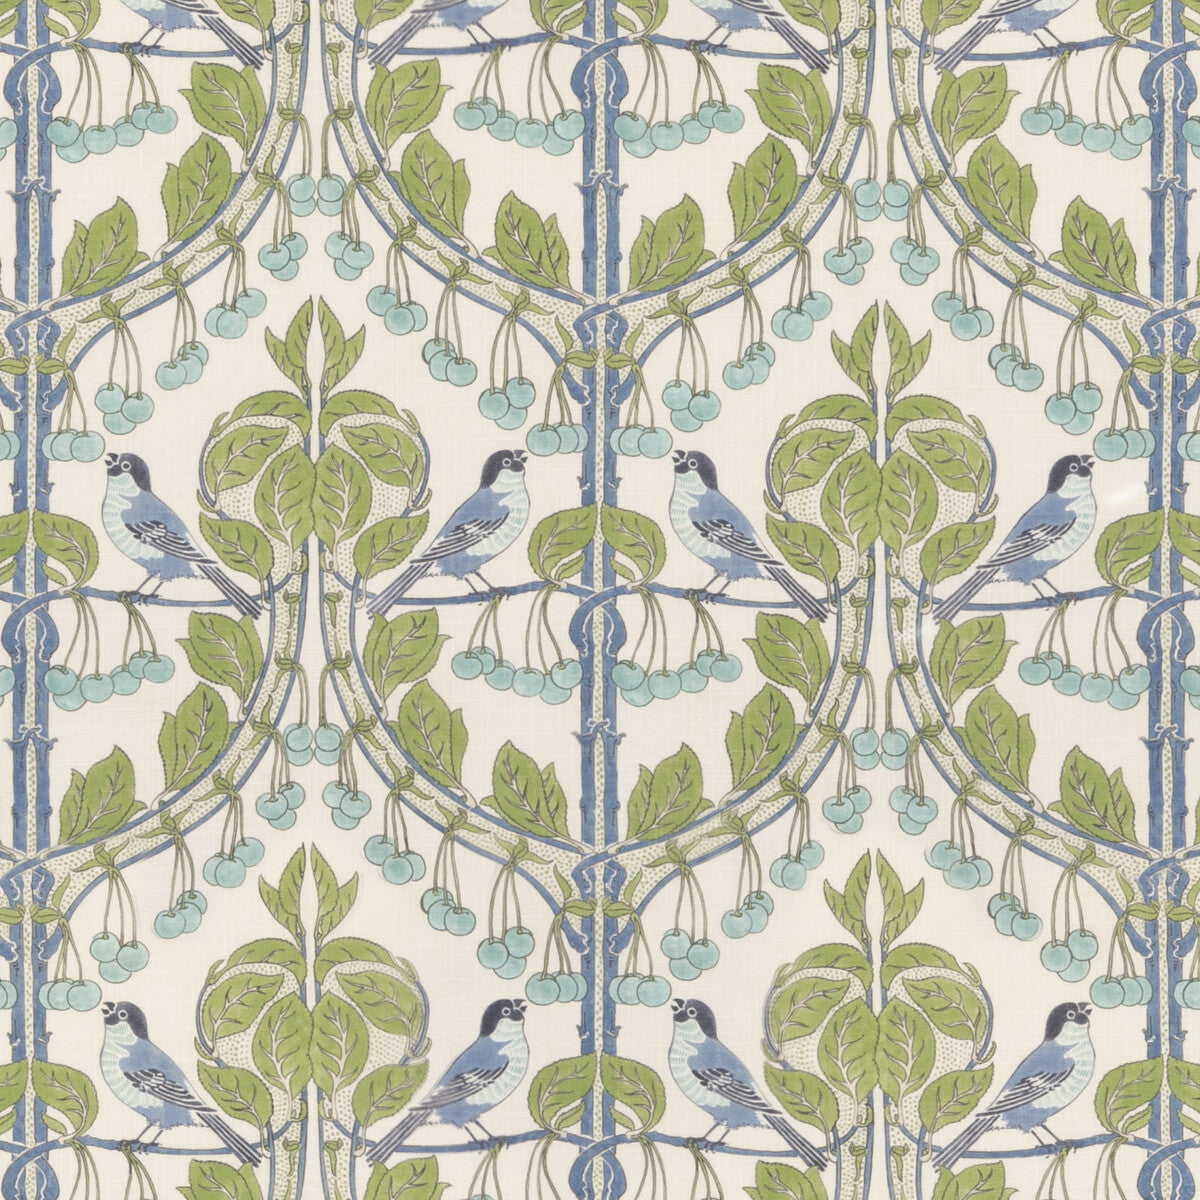 Birds &amp; Cherries fabric in green/blue color - pattern BP10993.1.0 - by G P &amp; J Baker in the Original Brantwood Fabric collection